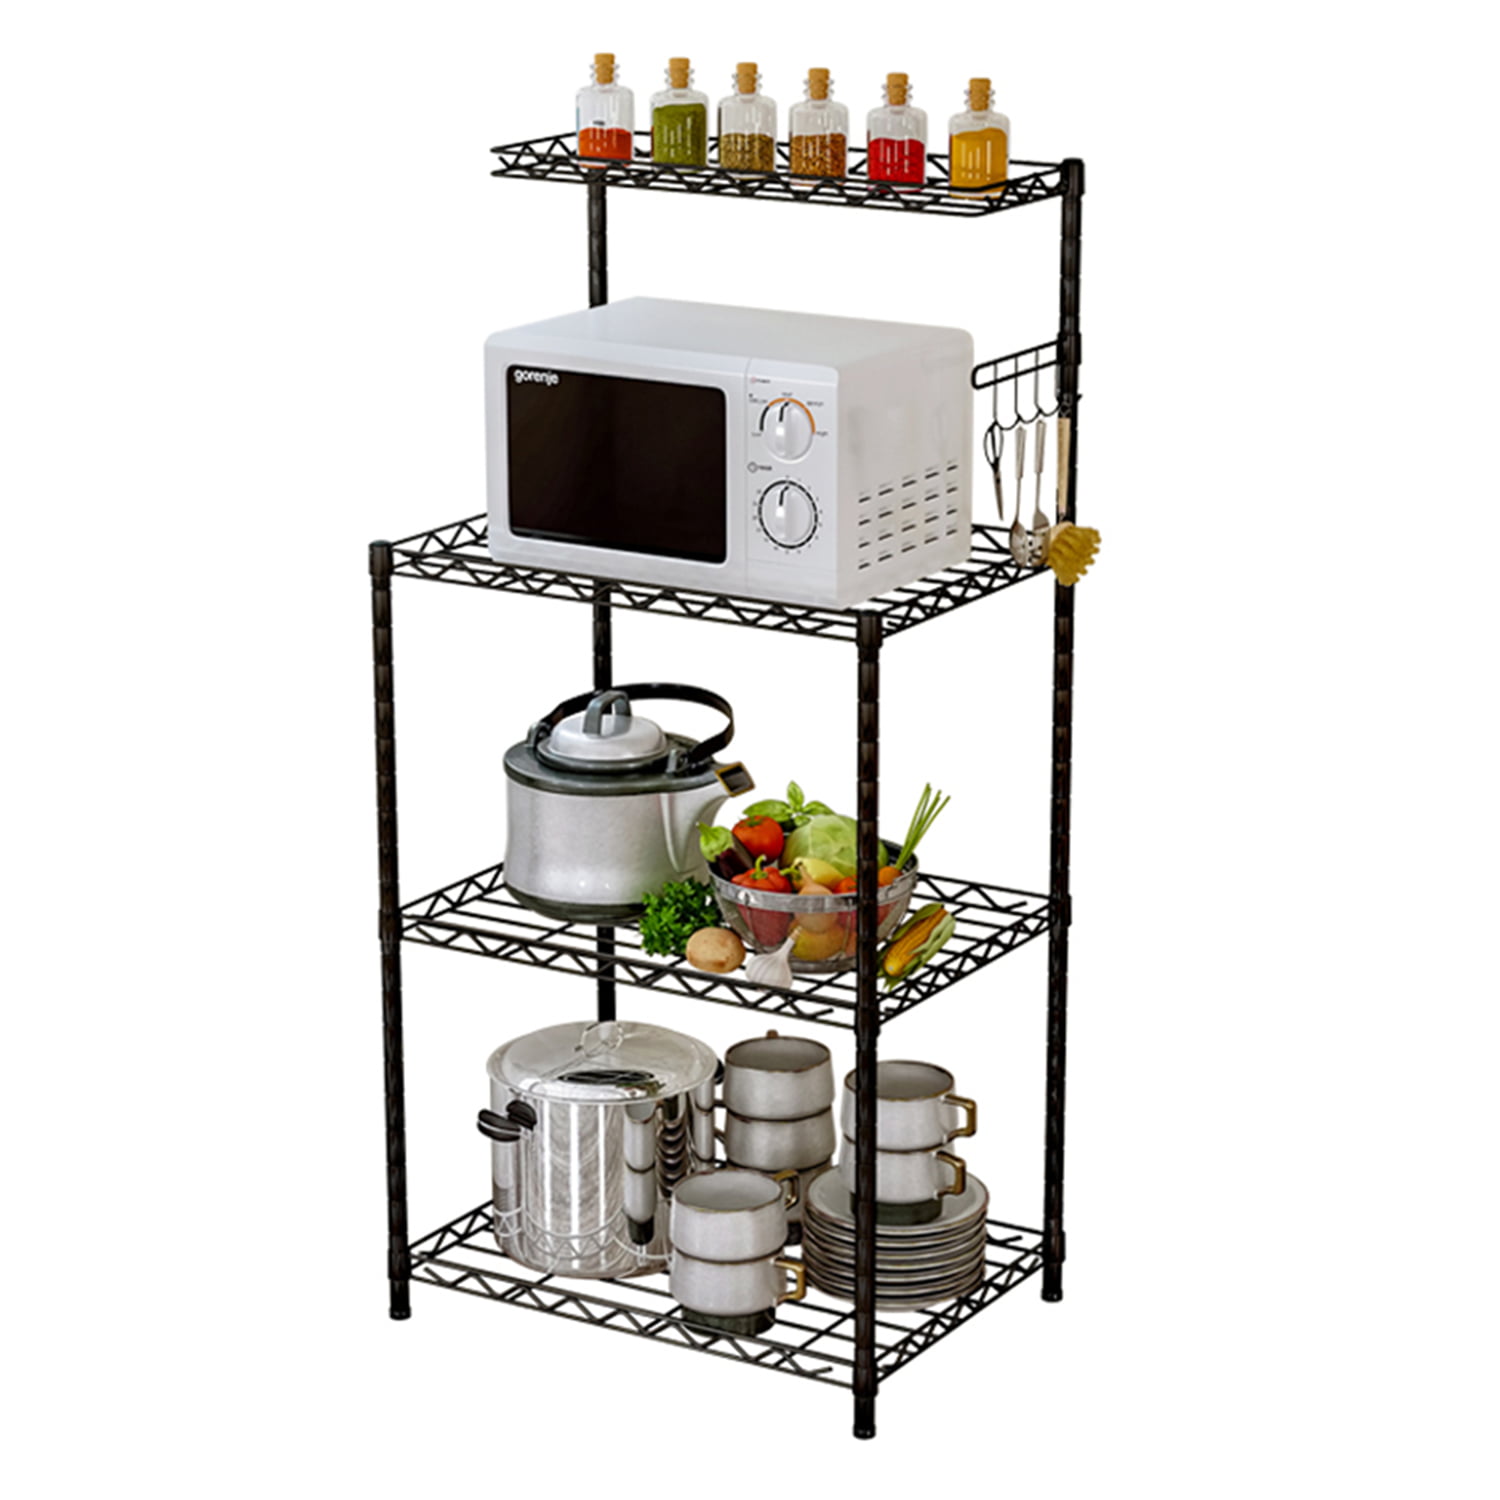 Versatile 4 Tier Bakers Rack Microwave Stand Kitchen Oven Adjustable Rack With Wire Mesh Grid Shelves Multifunctional Storage Rack With 5 Side Hooks Walmart Canada